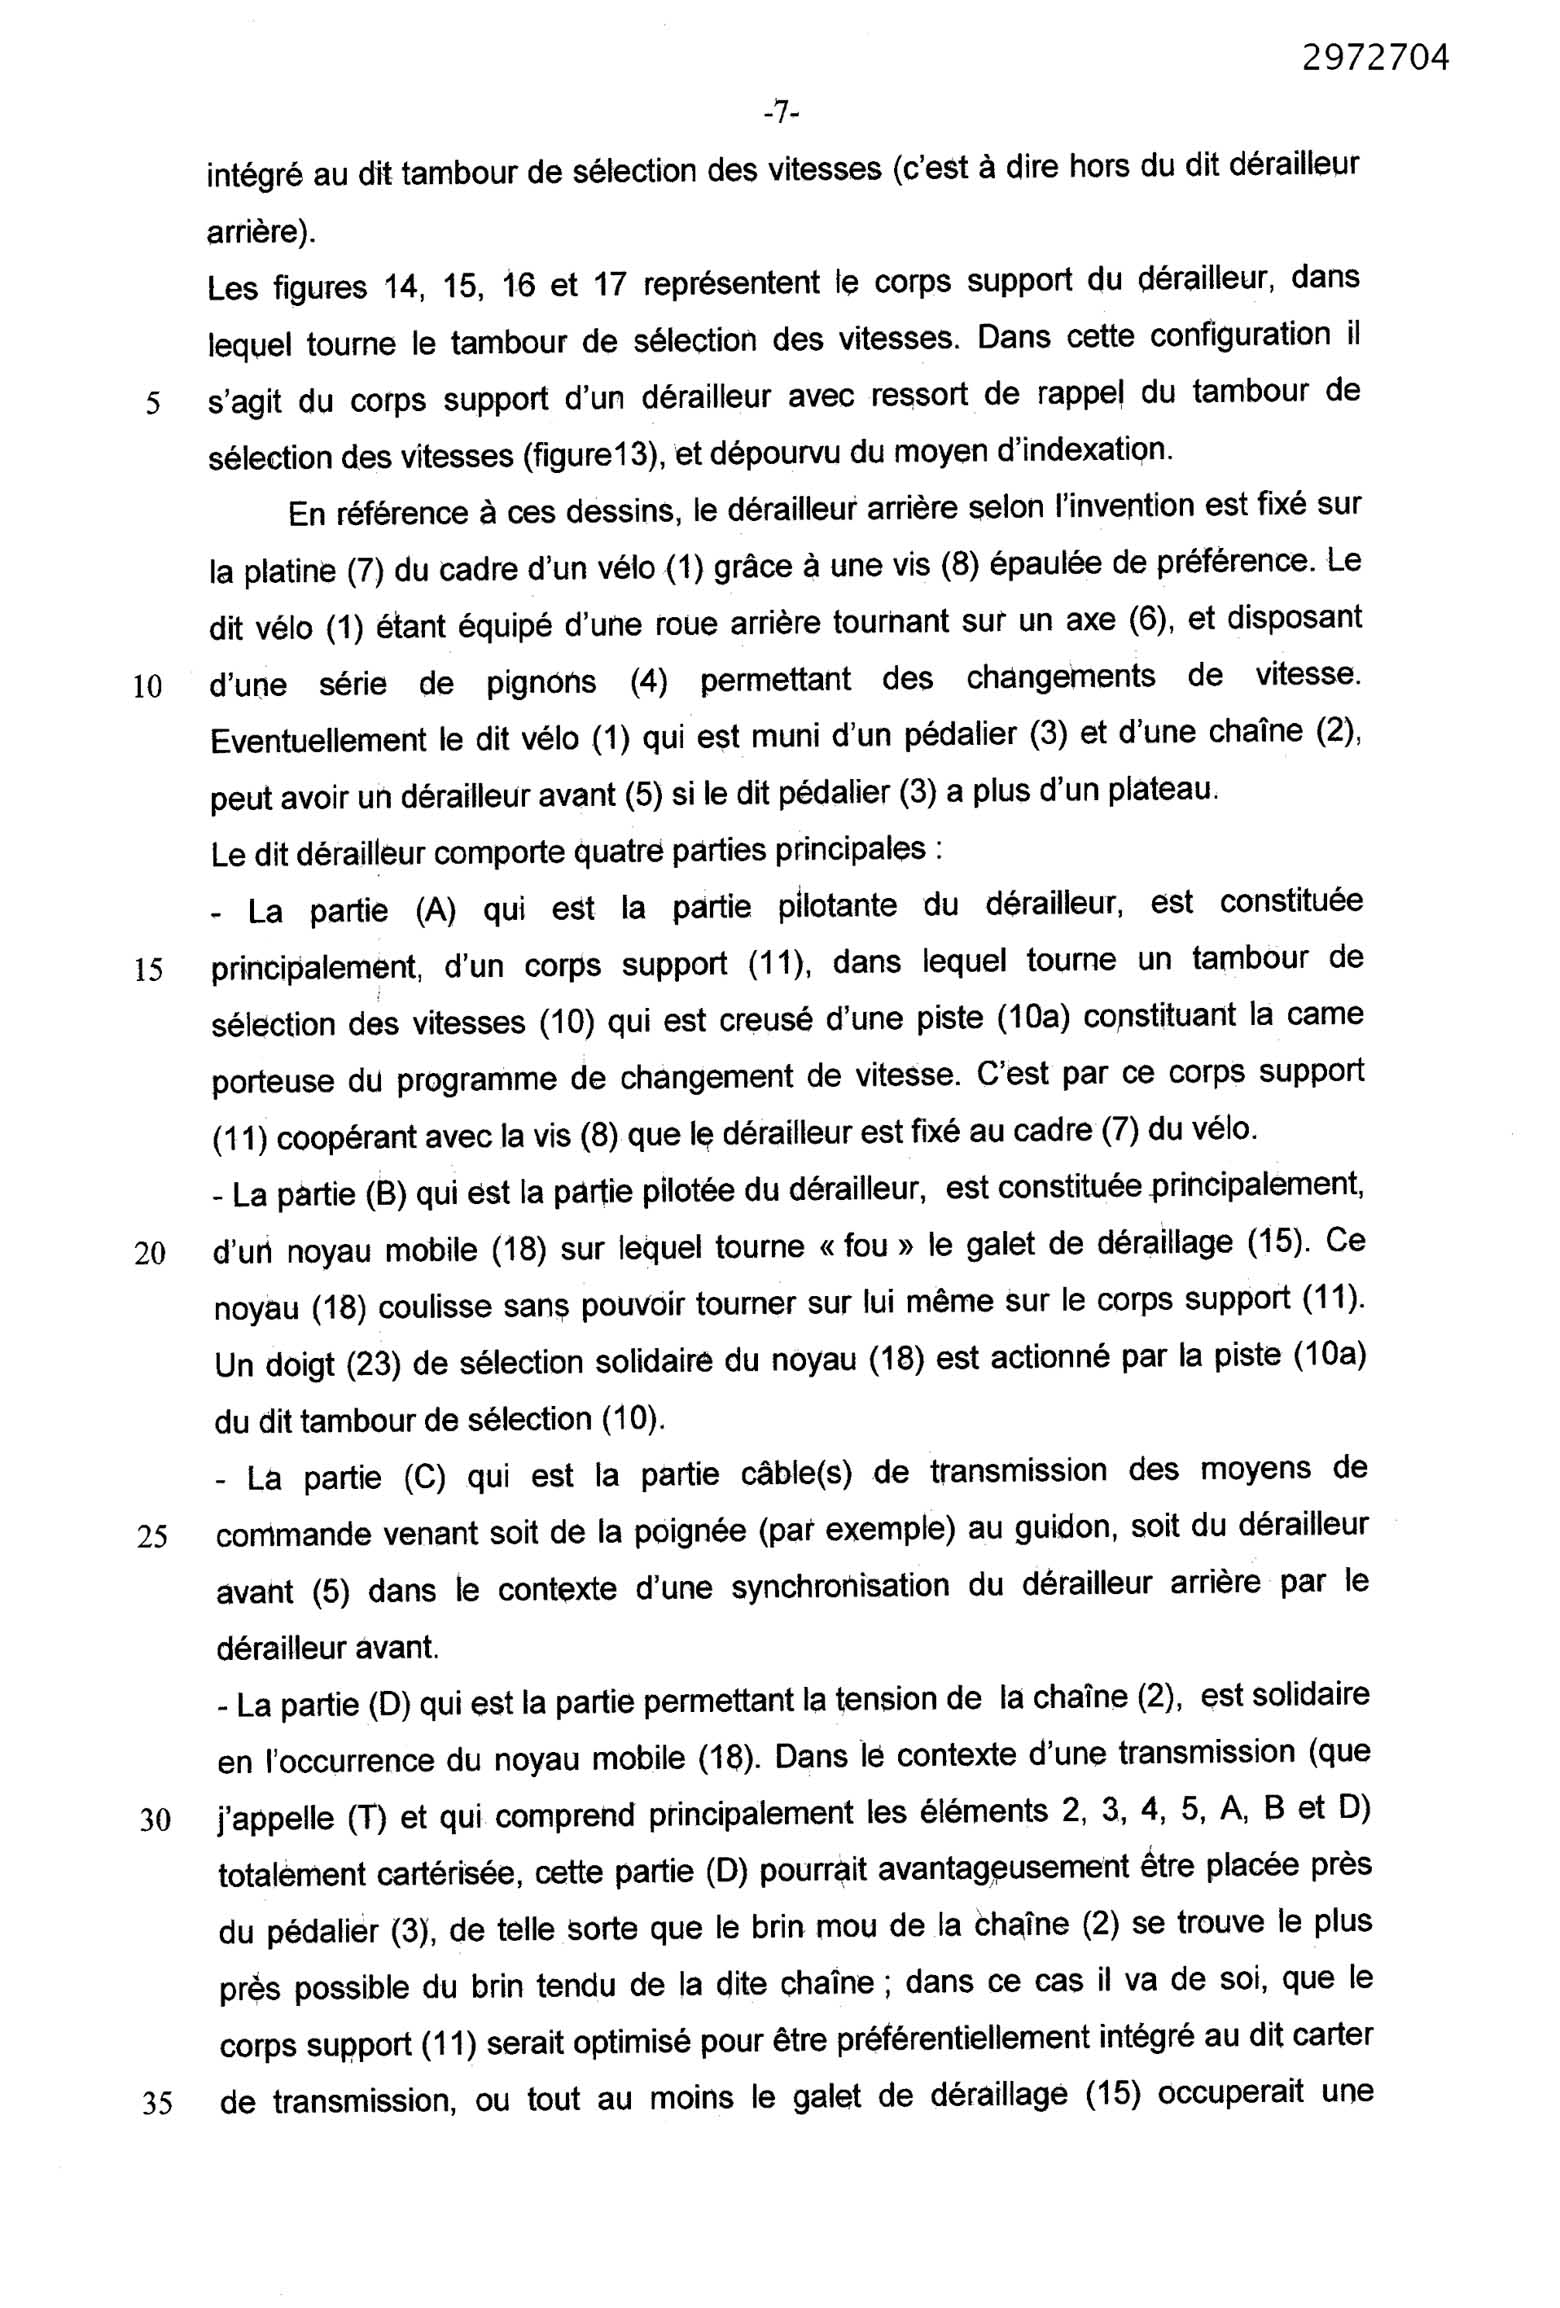 French Patent 2,972,704 - EGS scan 8 main image